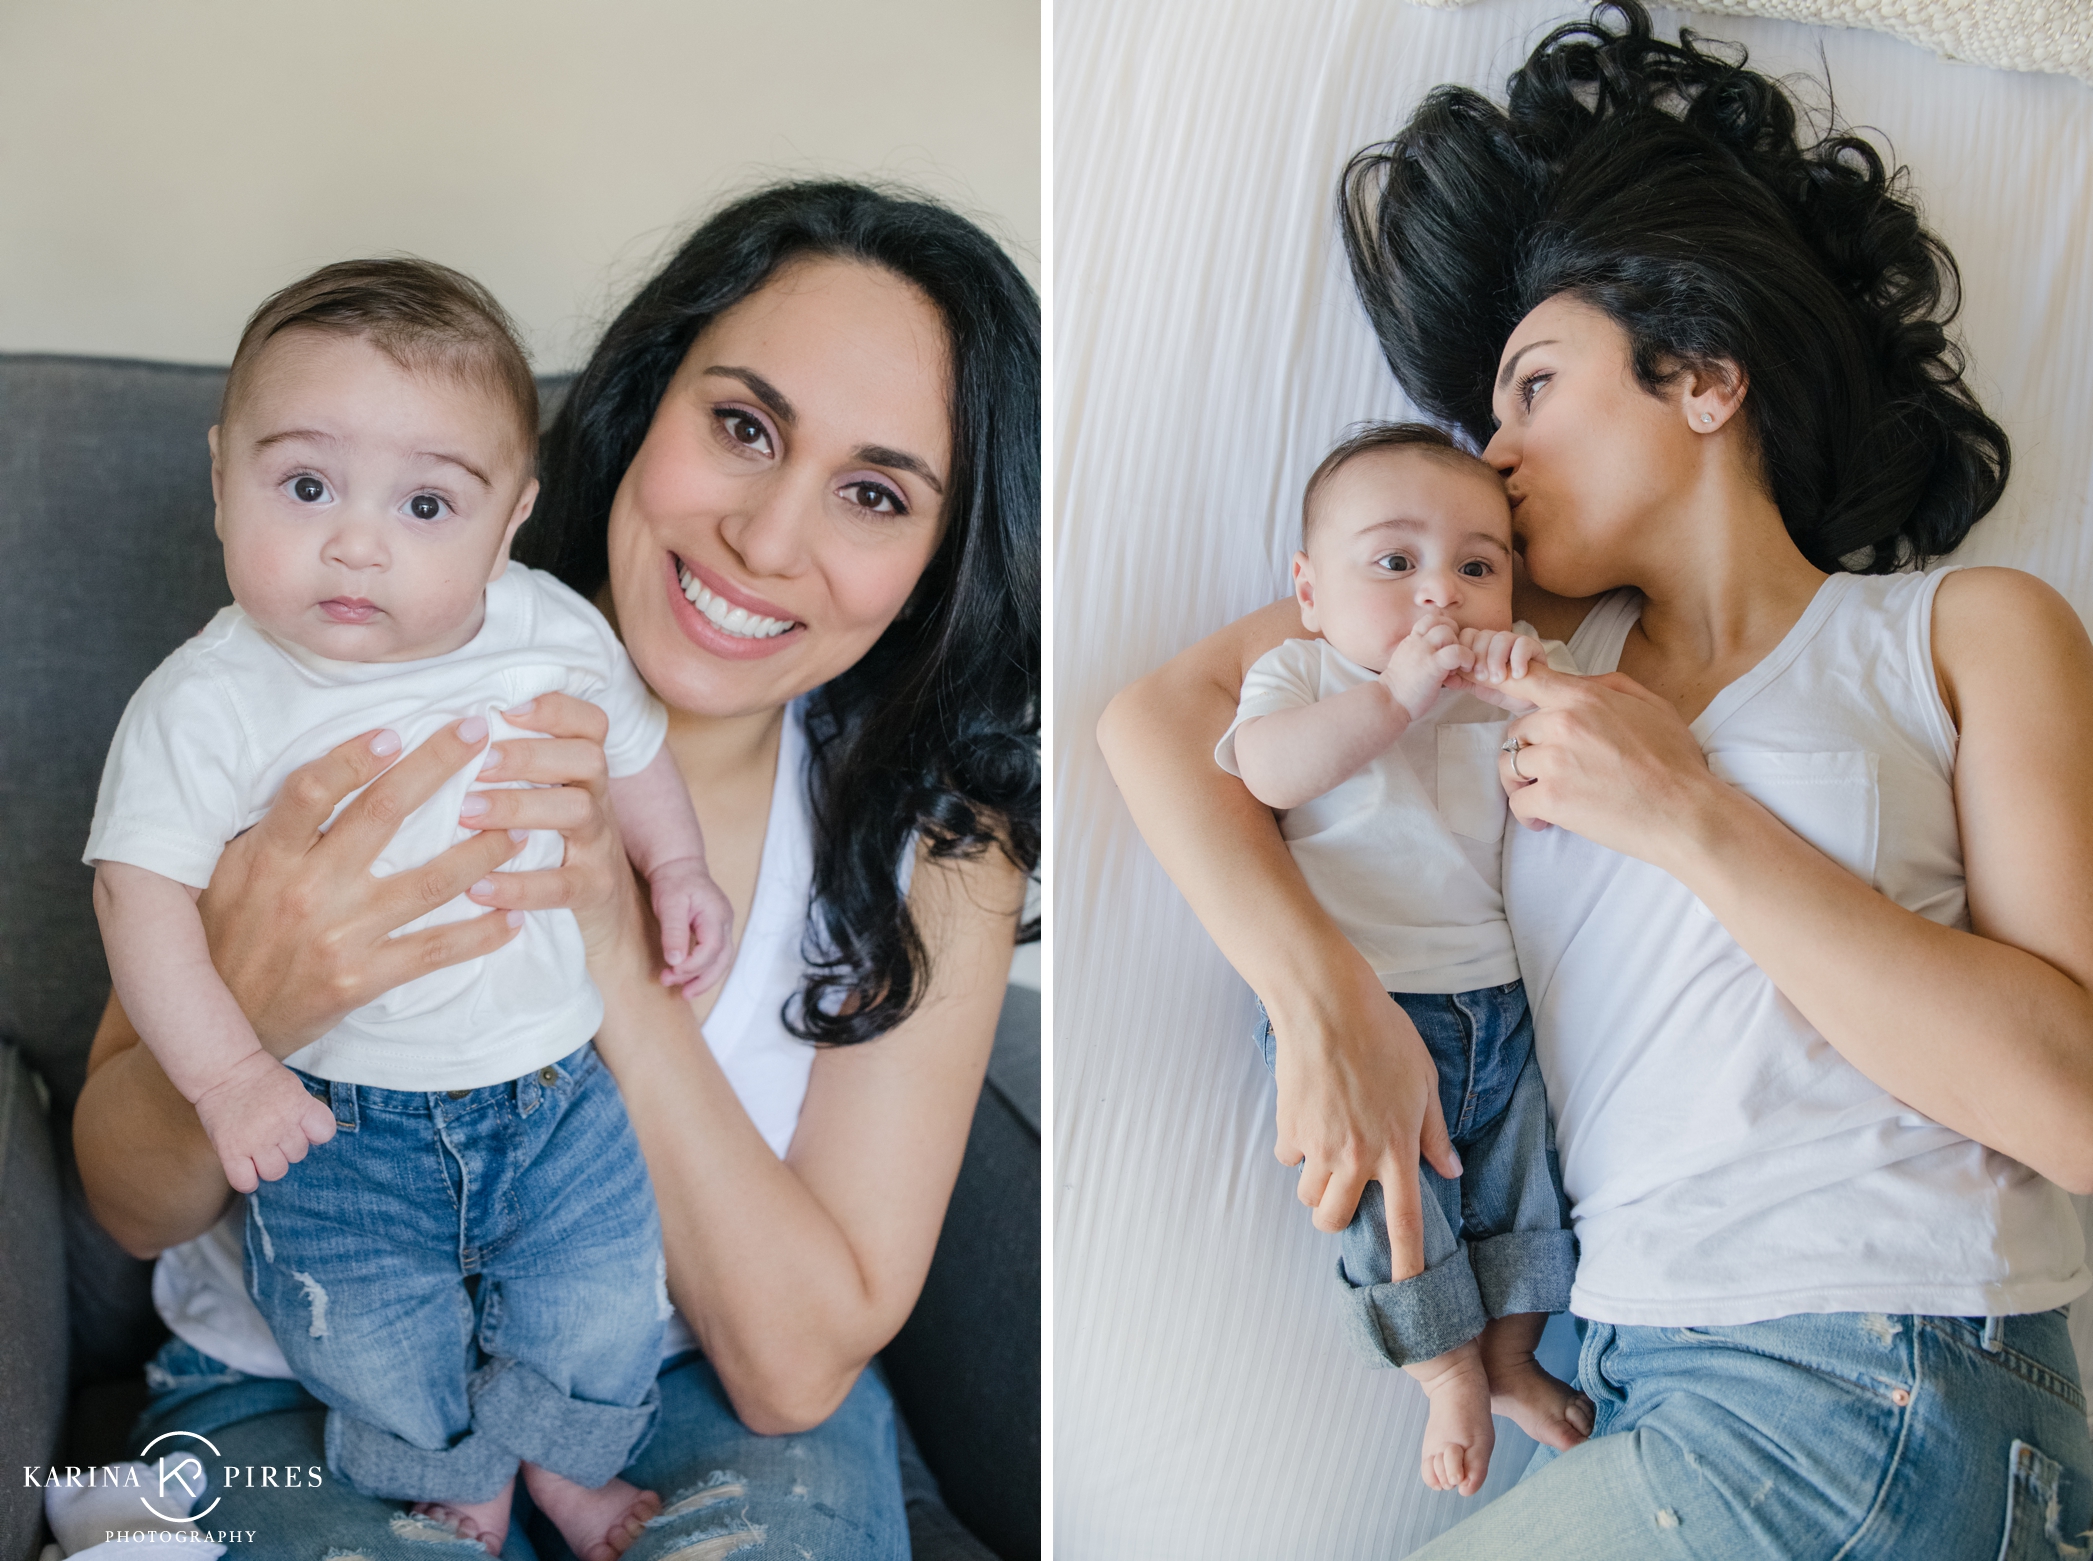 The Loewy Family’s Newborn Session